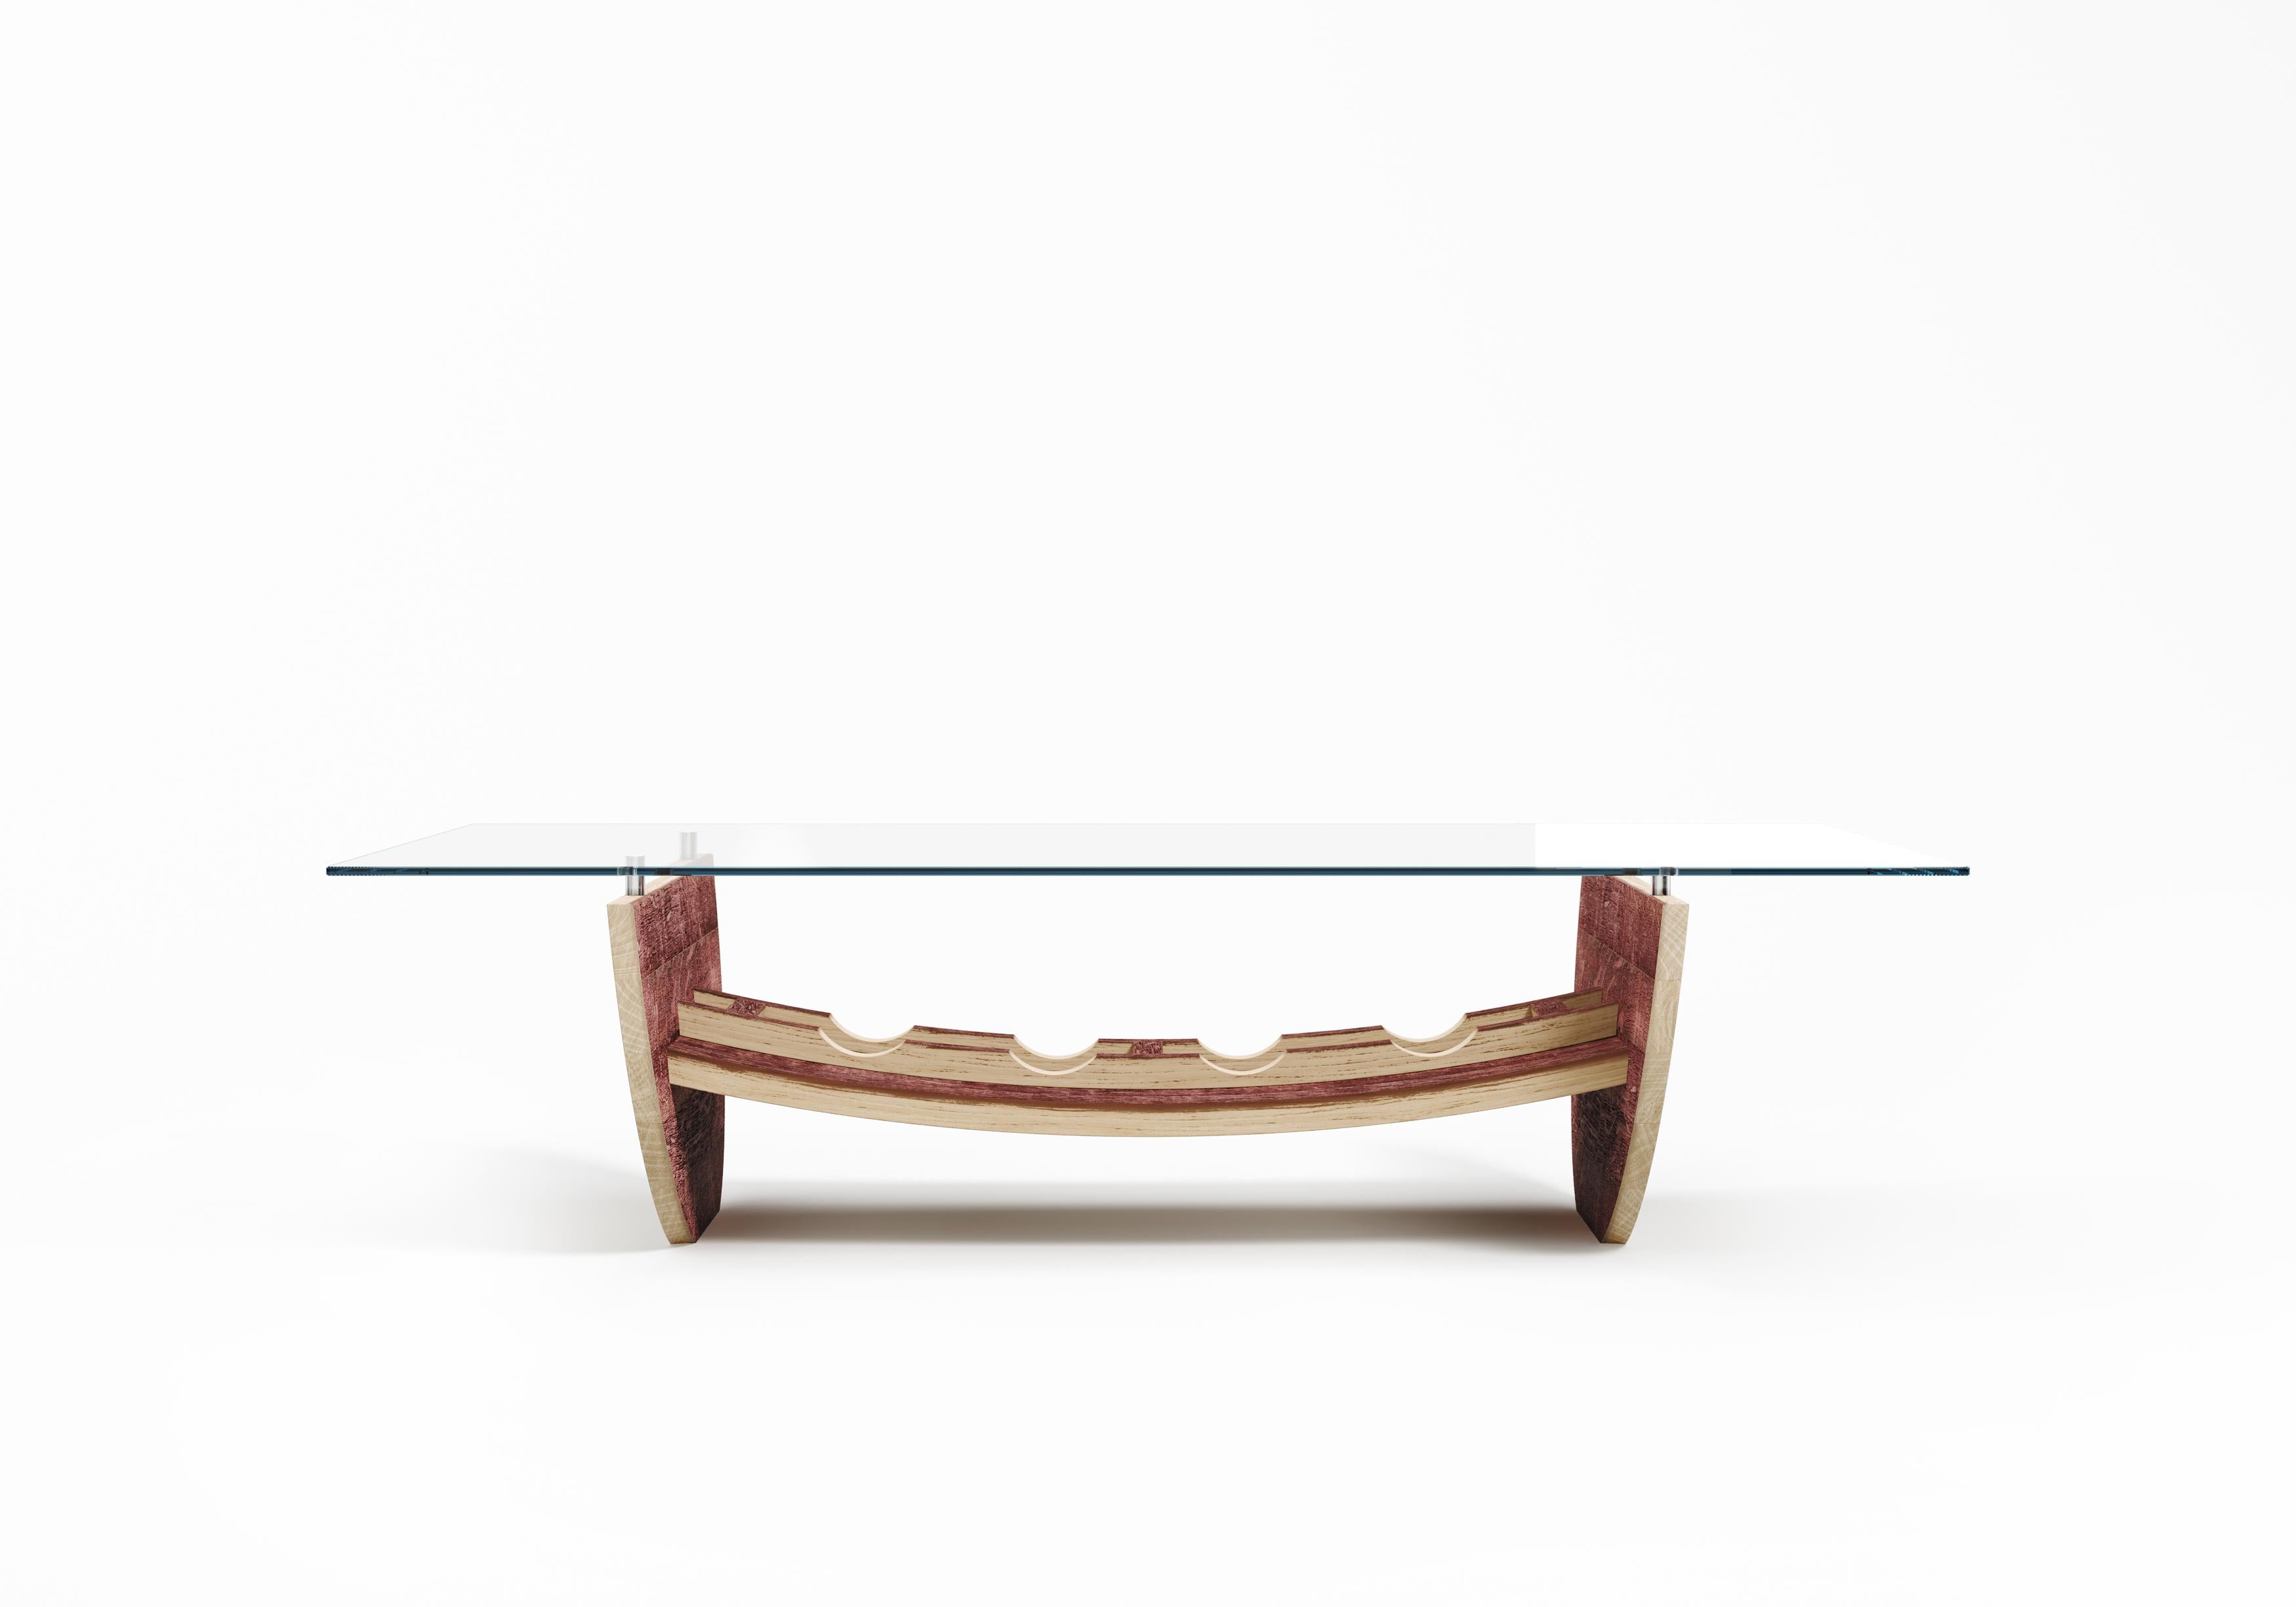 The Canai coffee table embodies a daring approach that places rarity at the forefront. Its semi-circular legs, repurposed from wine barrel lids, incorporate the concave structure of the staves, proudly showcasing the intrinsic beauty of wine aging